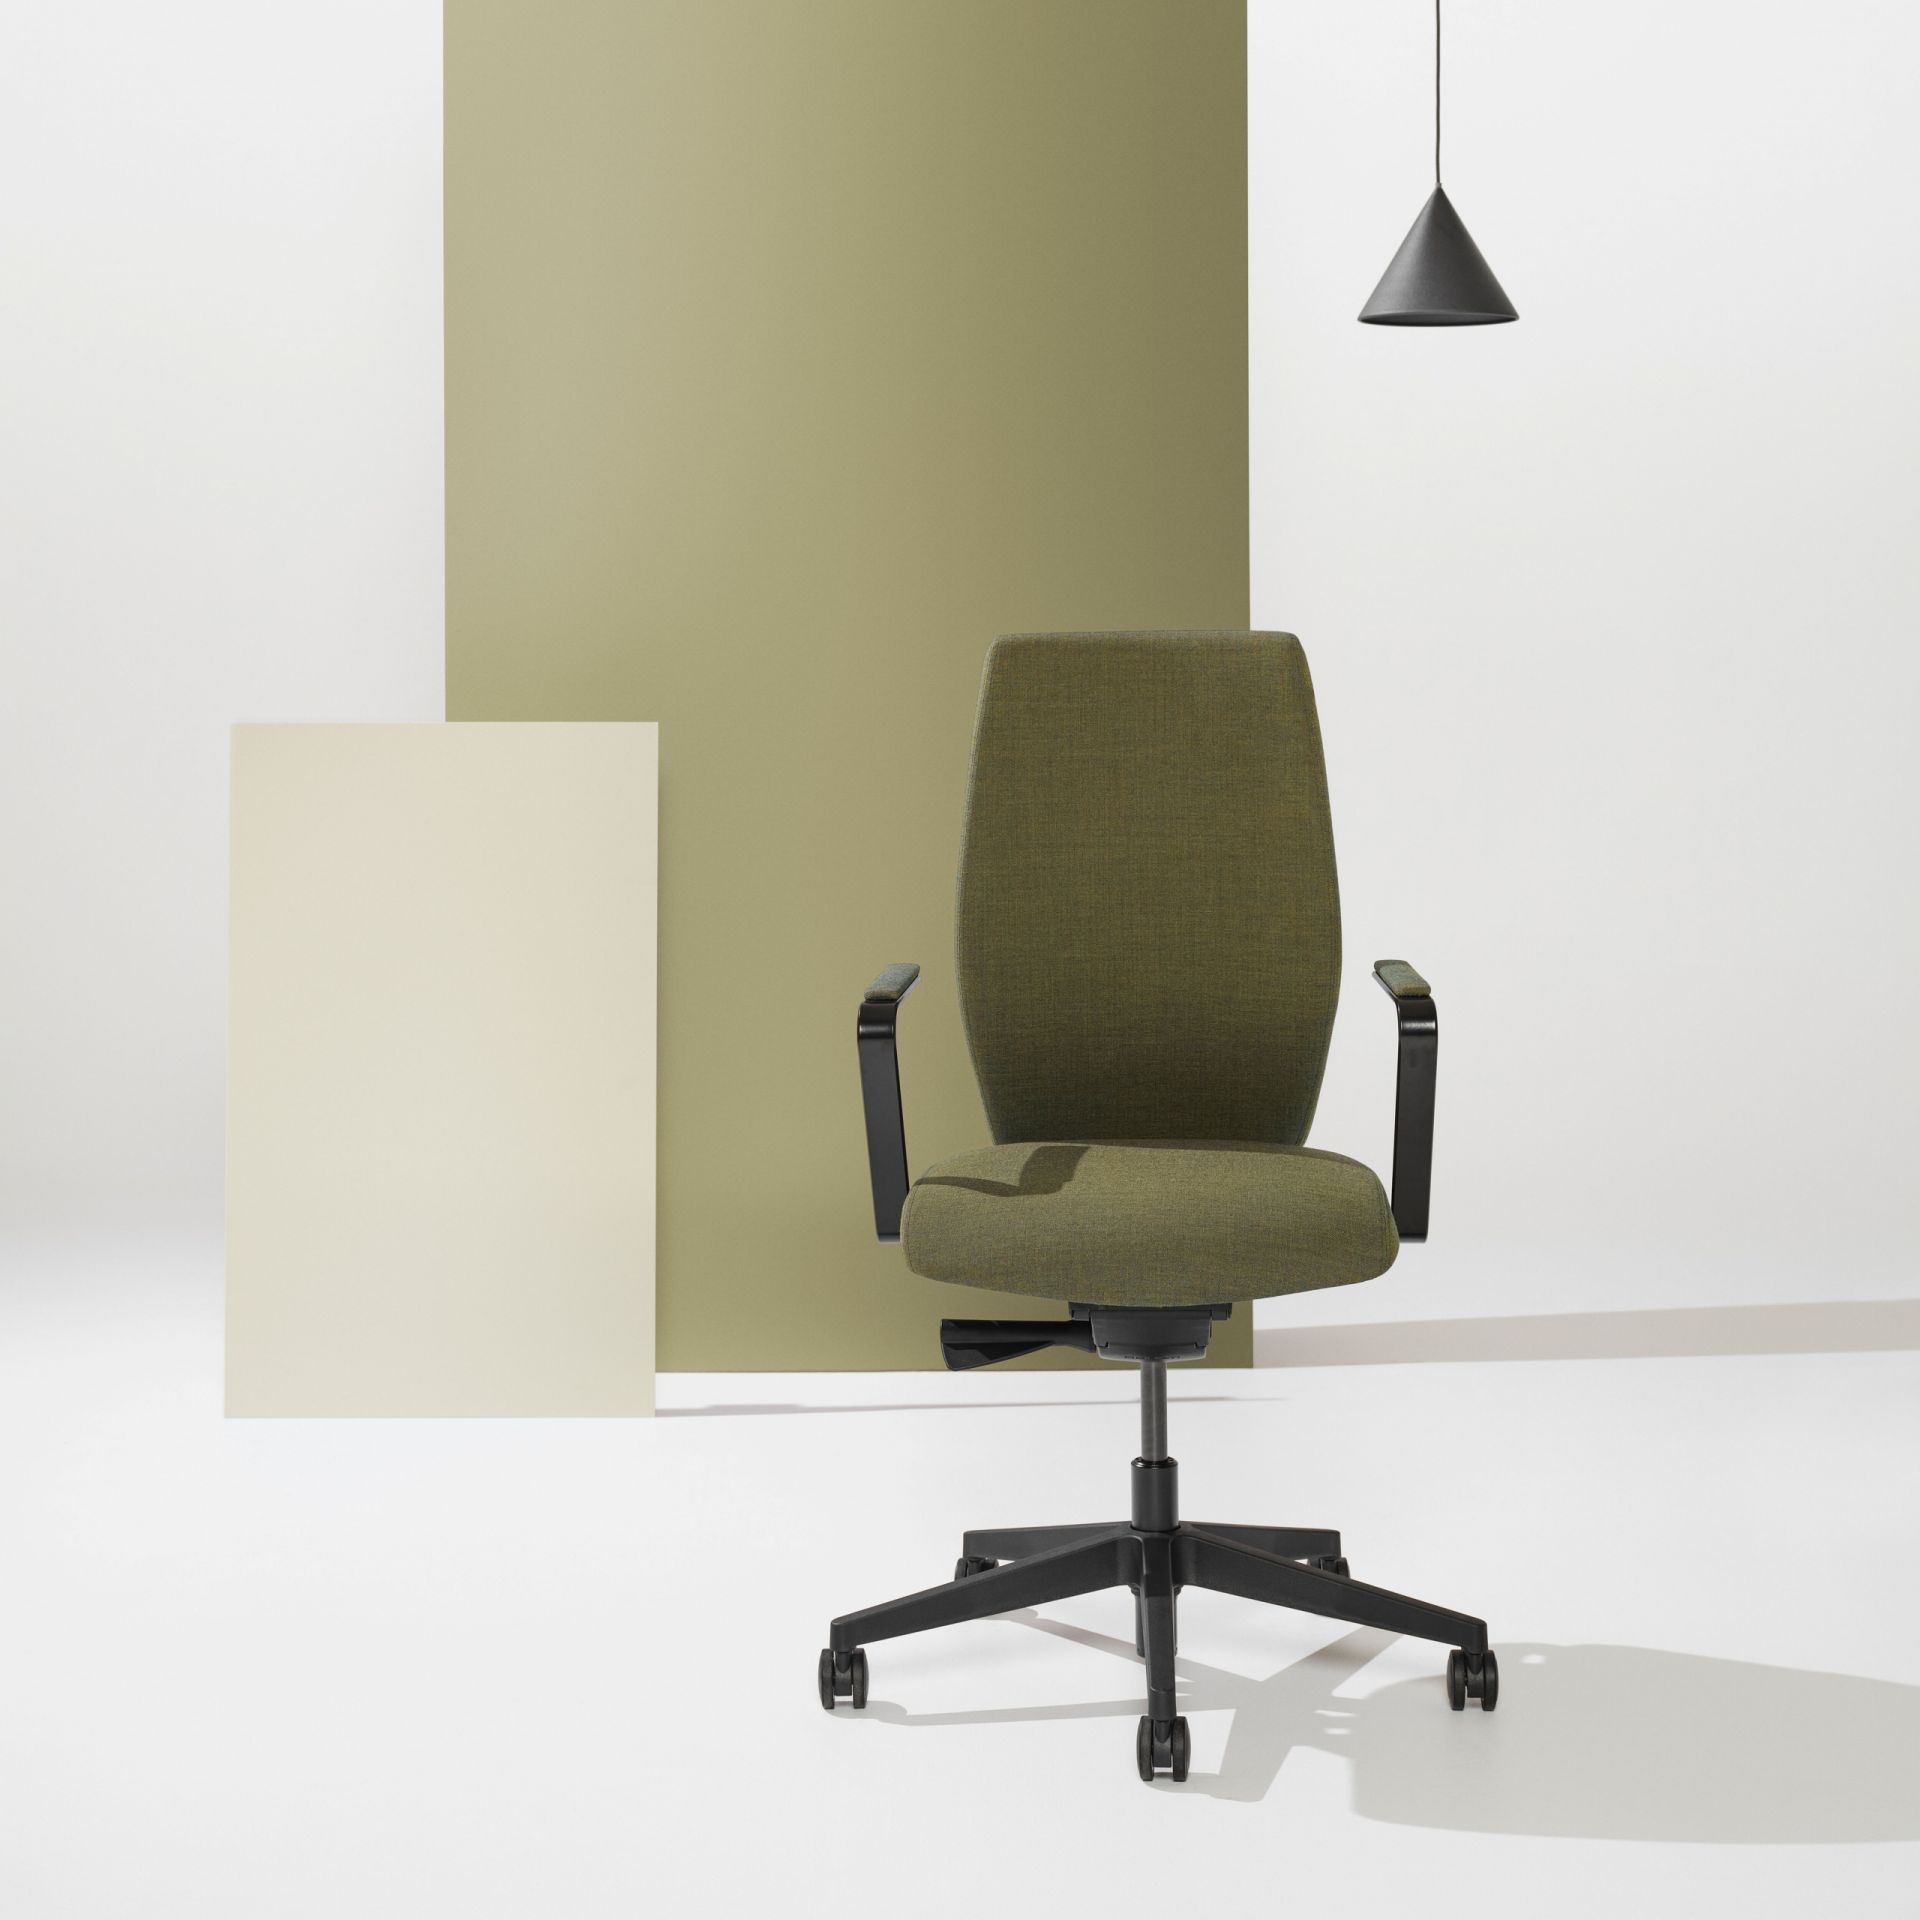 Savo Soul Soul meeting chair product image 1